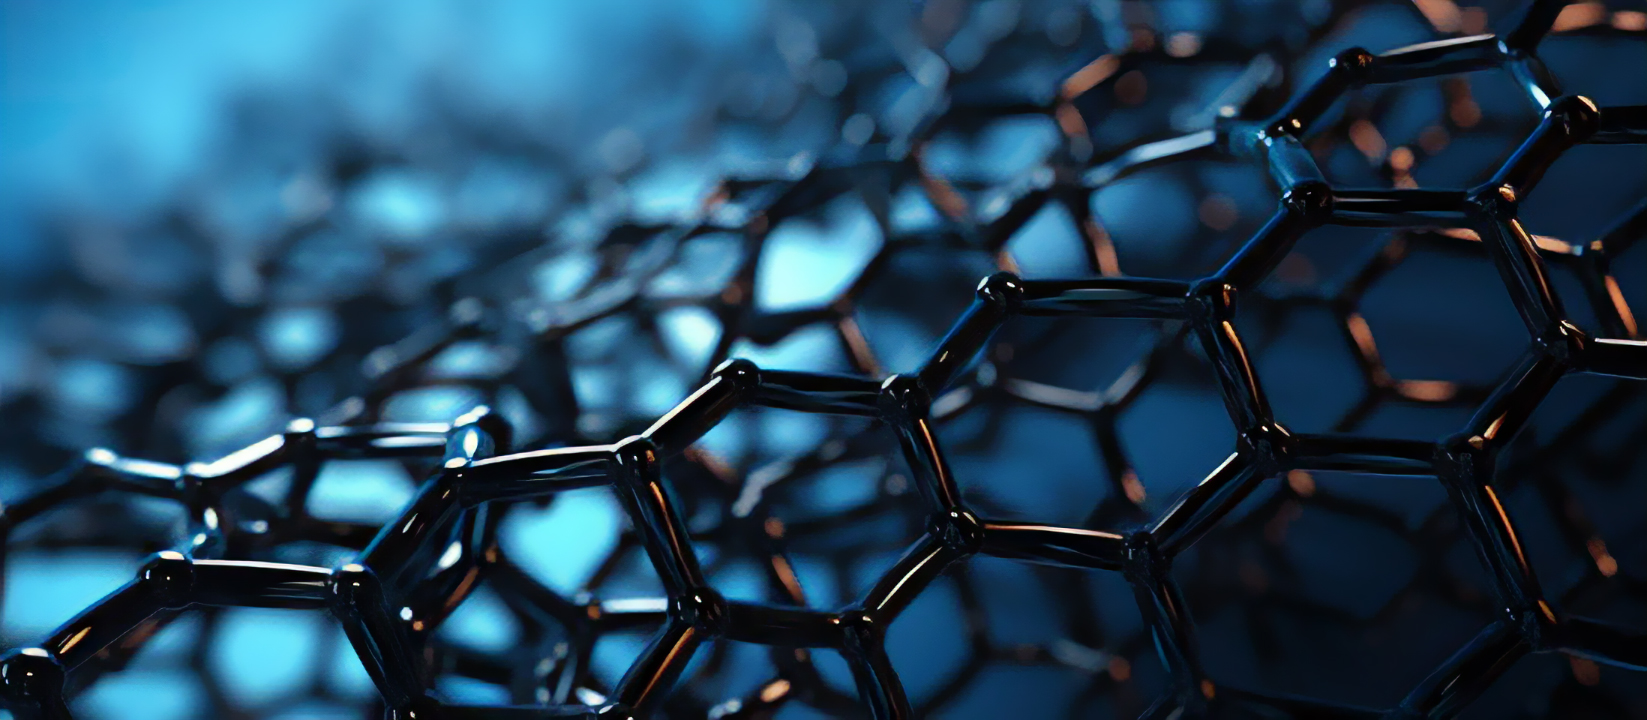 The crystalline structure of graphene